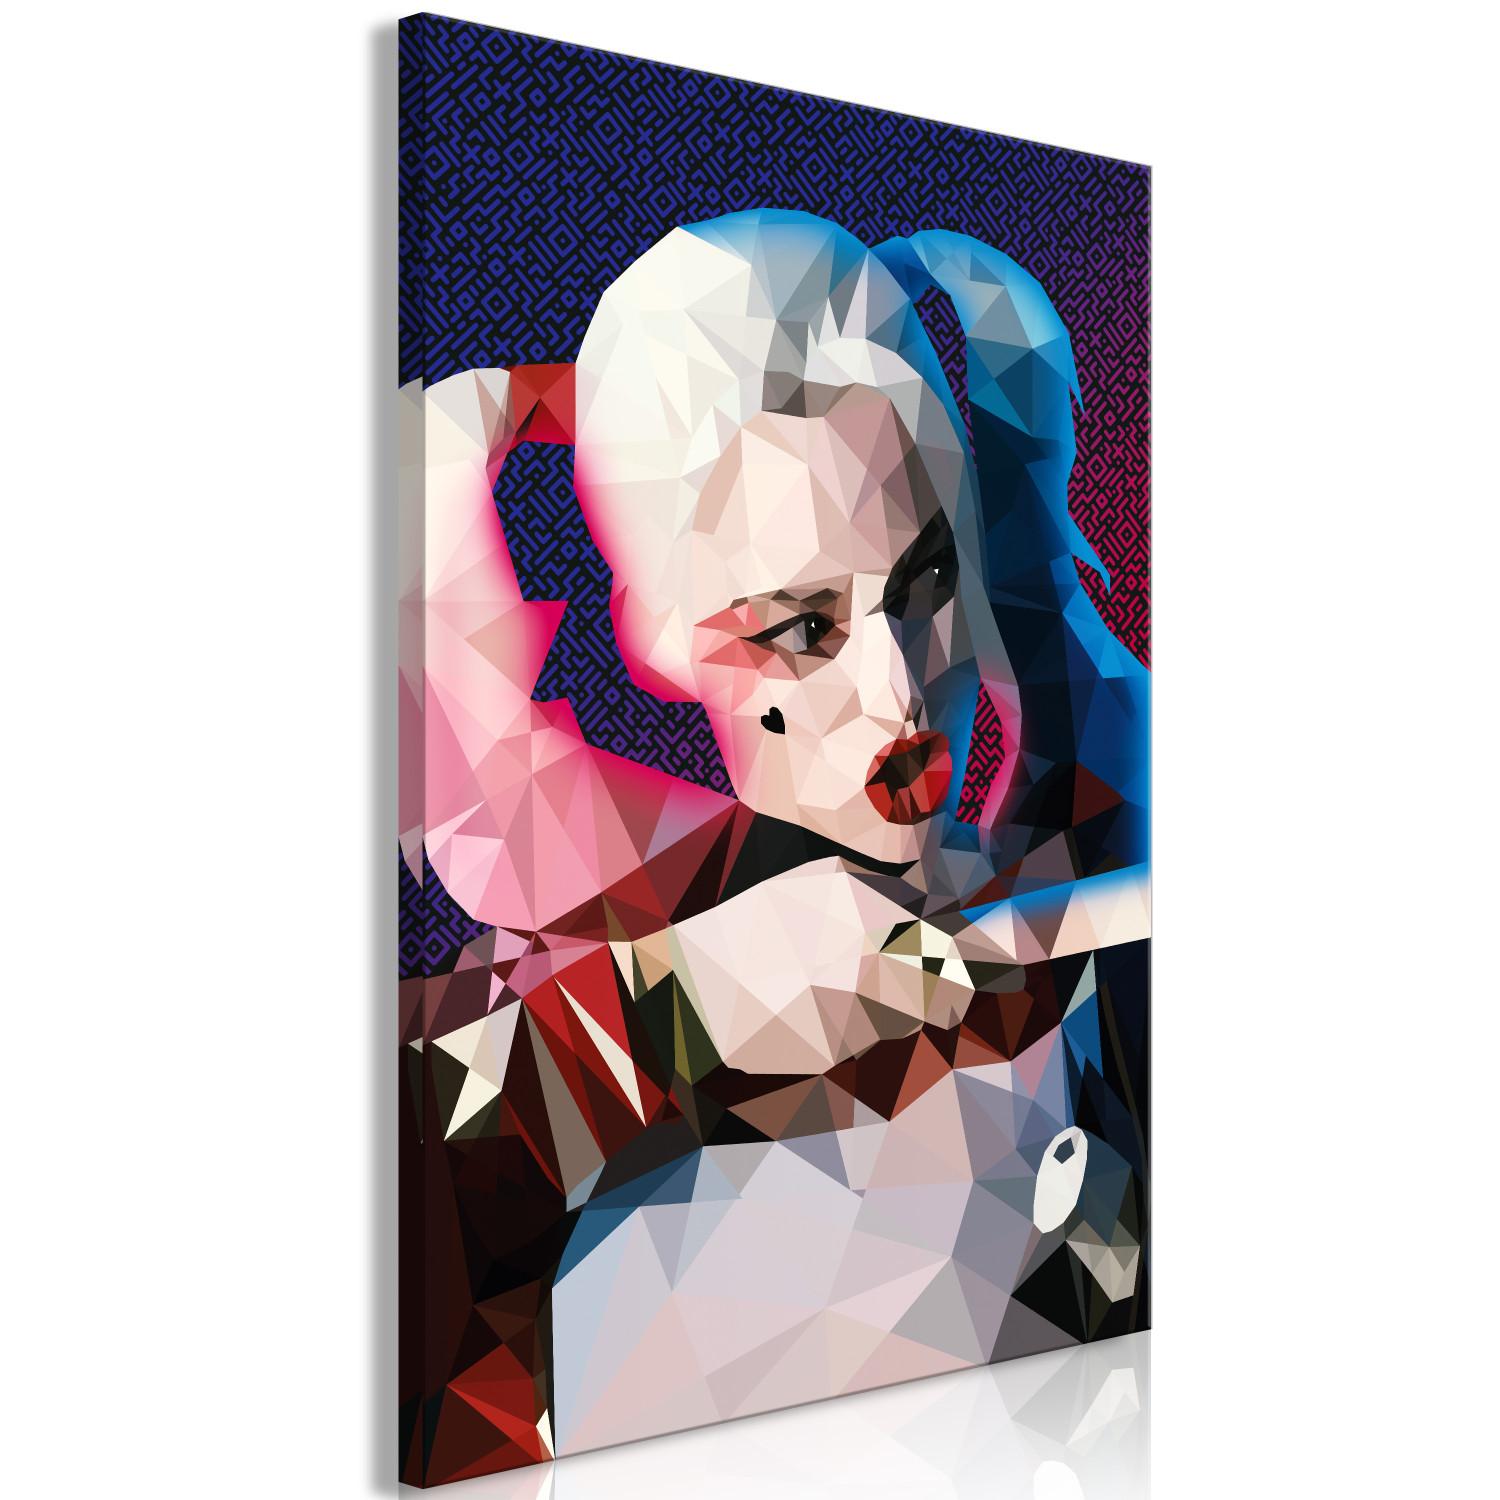 Canvas Famous heroine - a geometric, colourful portrait of a young woman